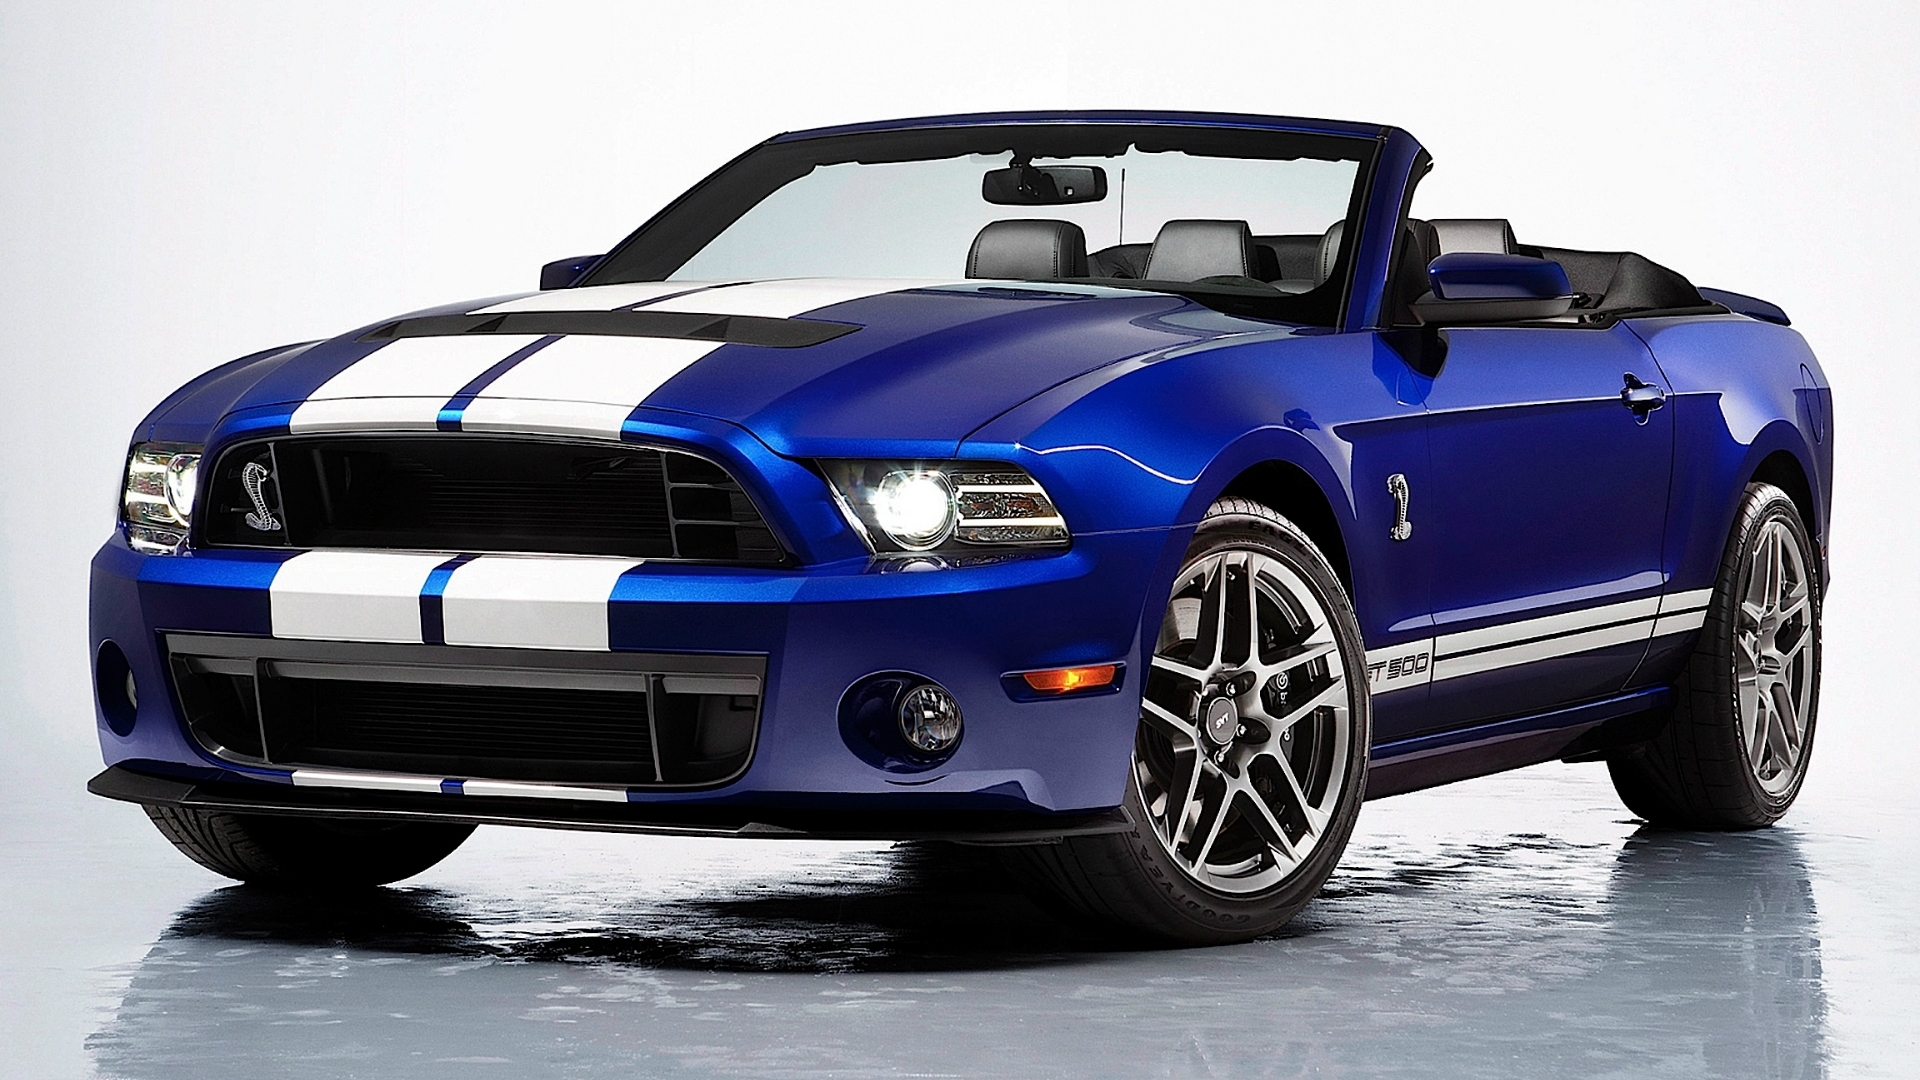 Ford Mustang Shelby Gt Nice Cars Wallpaper Full HD